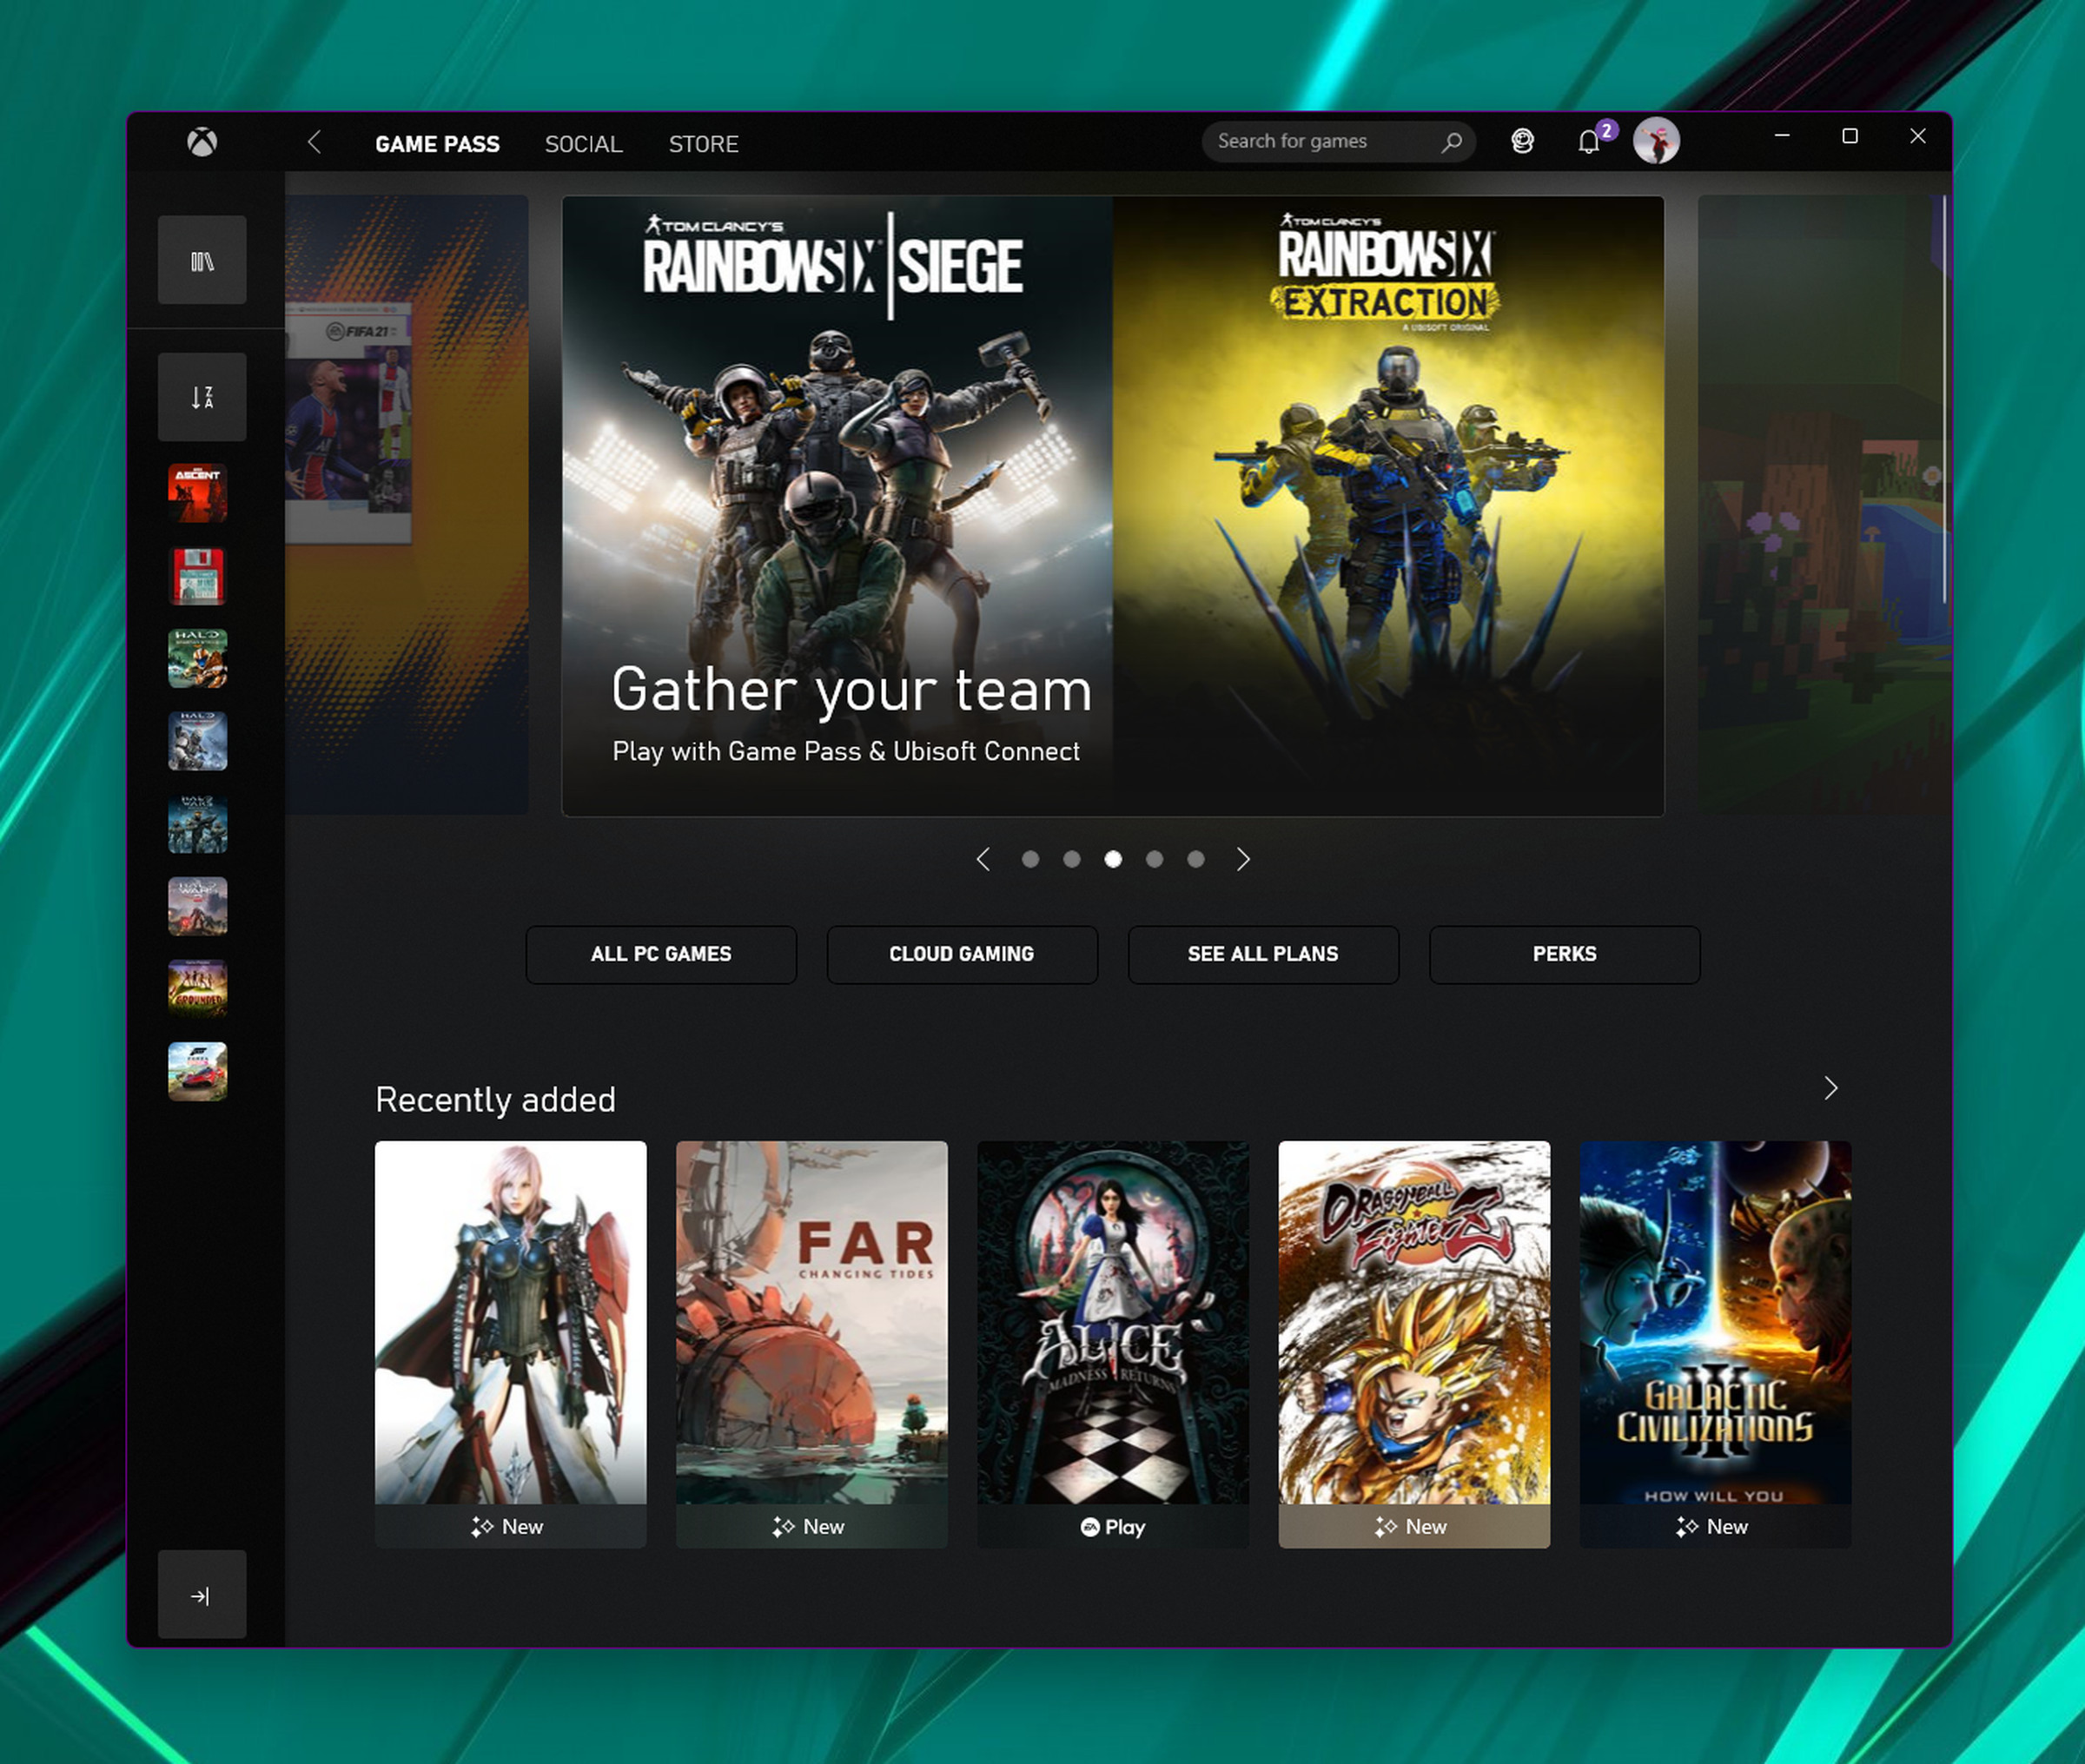 The home screen of the GamePass app